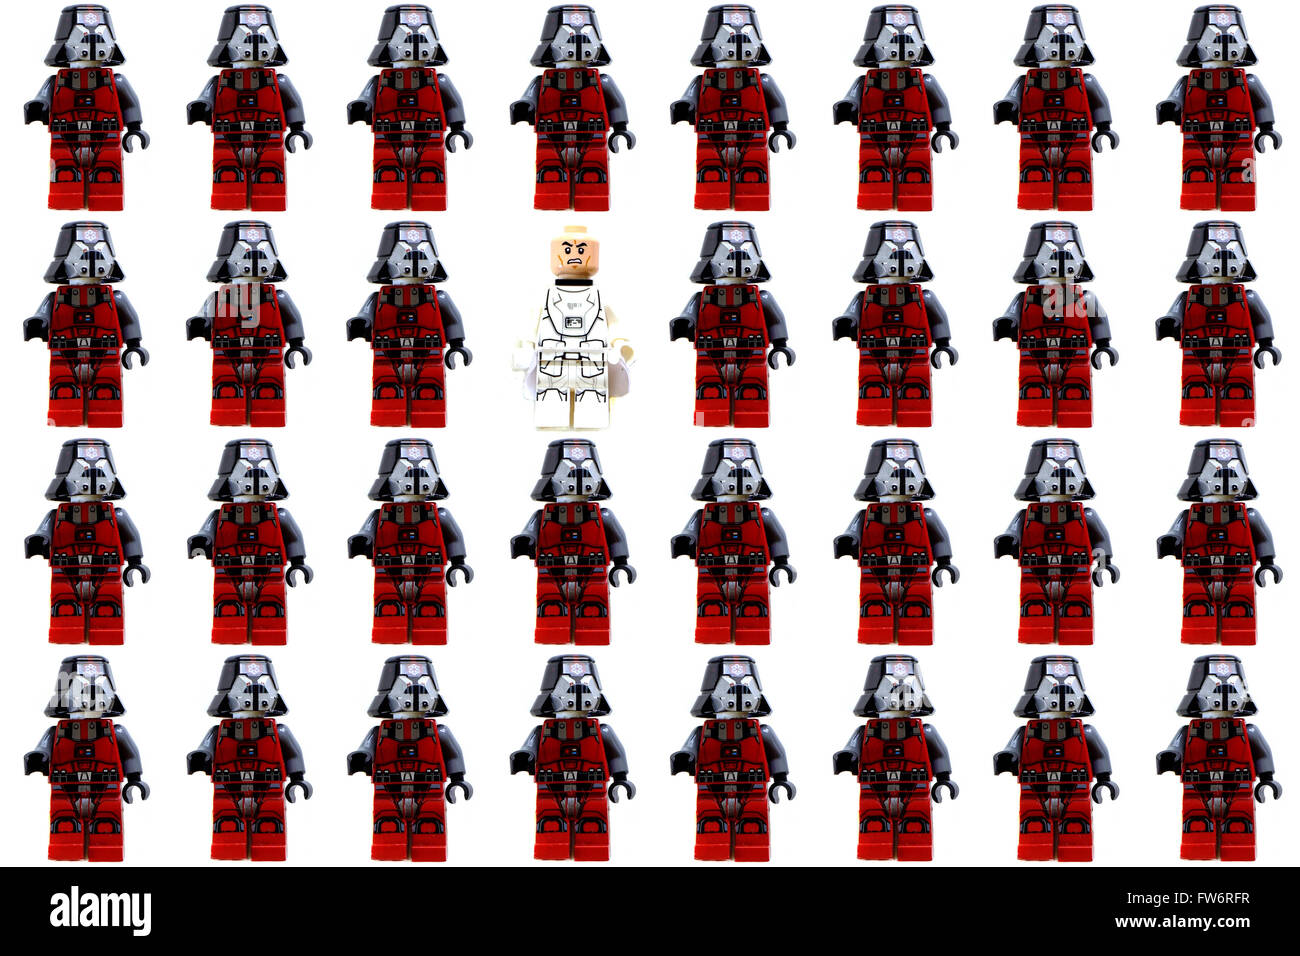 A grid of Lego Star Wars figures photographed against a white background  Stock Photo - Alamy